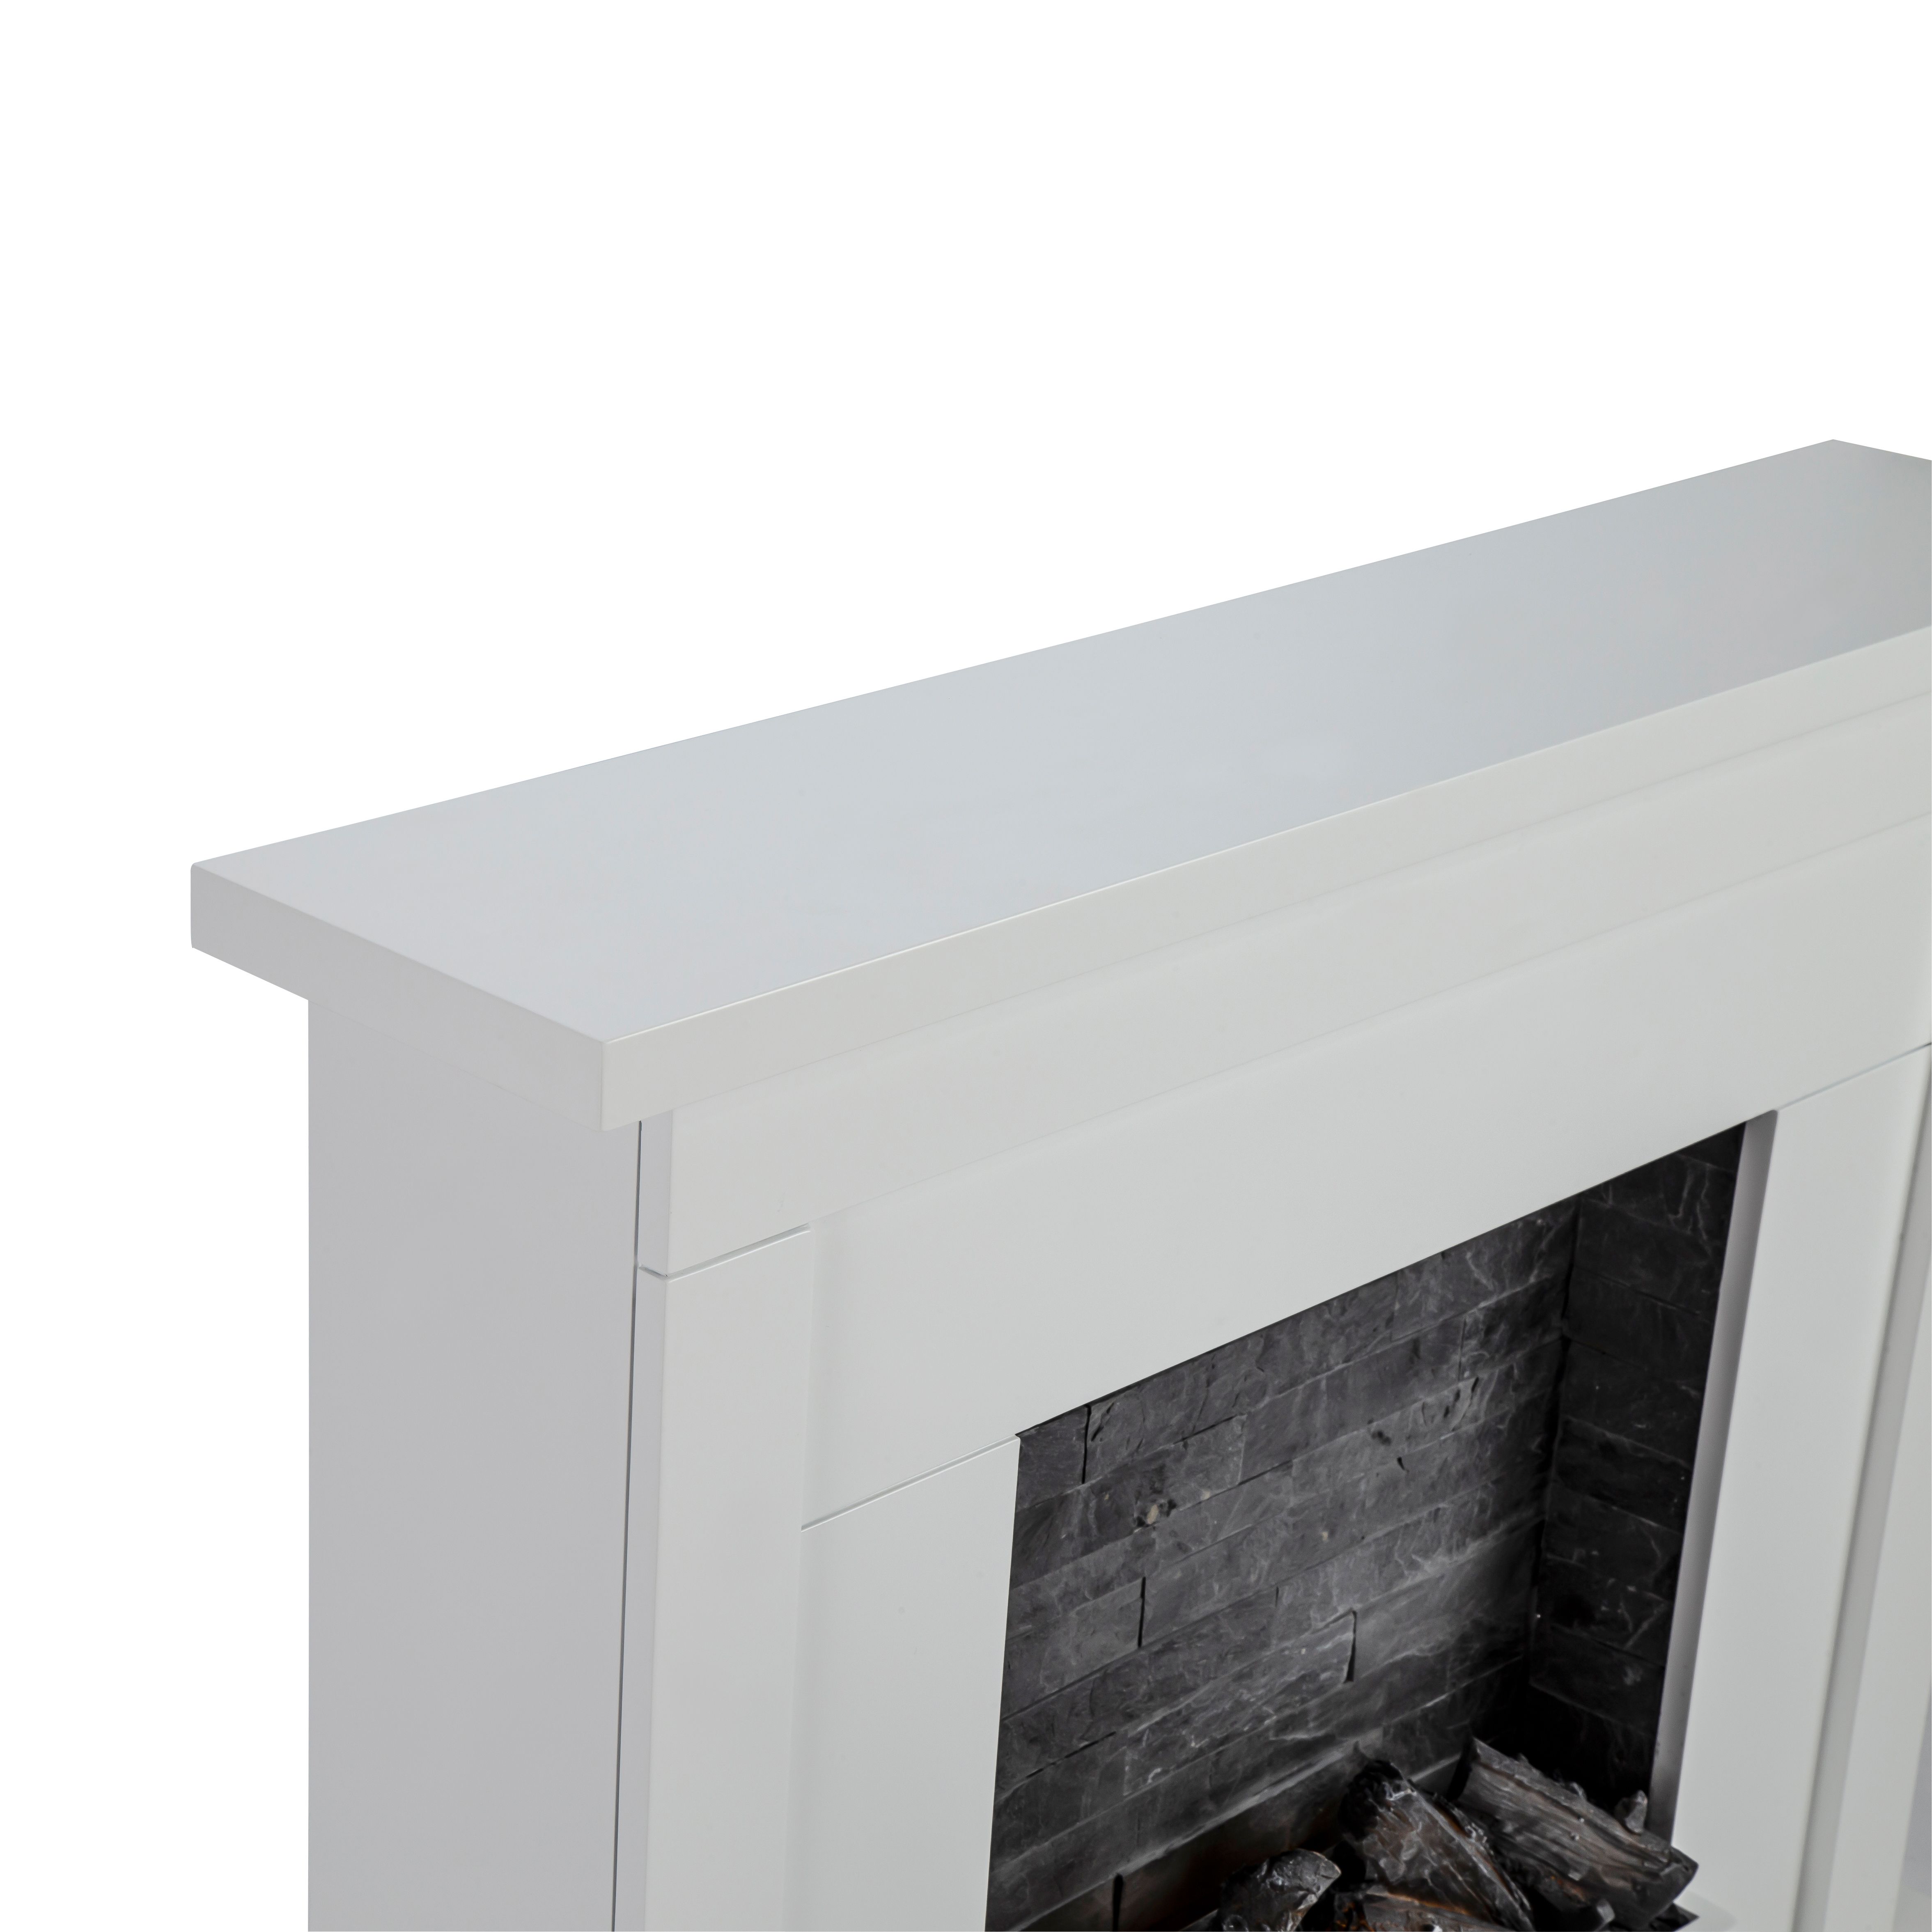 Focal Point Atherstone Slate White Electric Fire suite